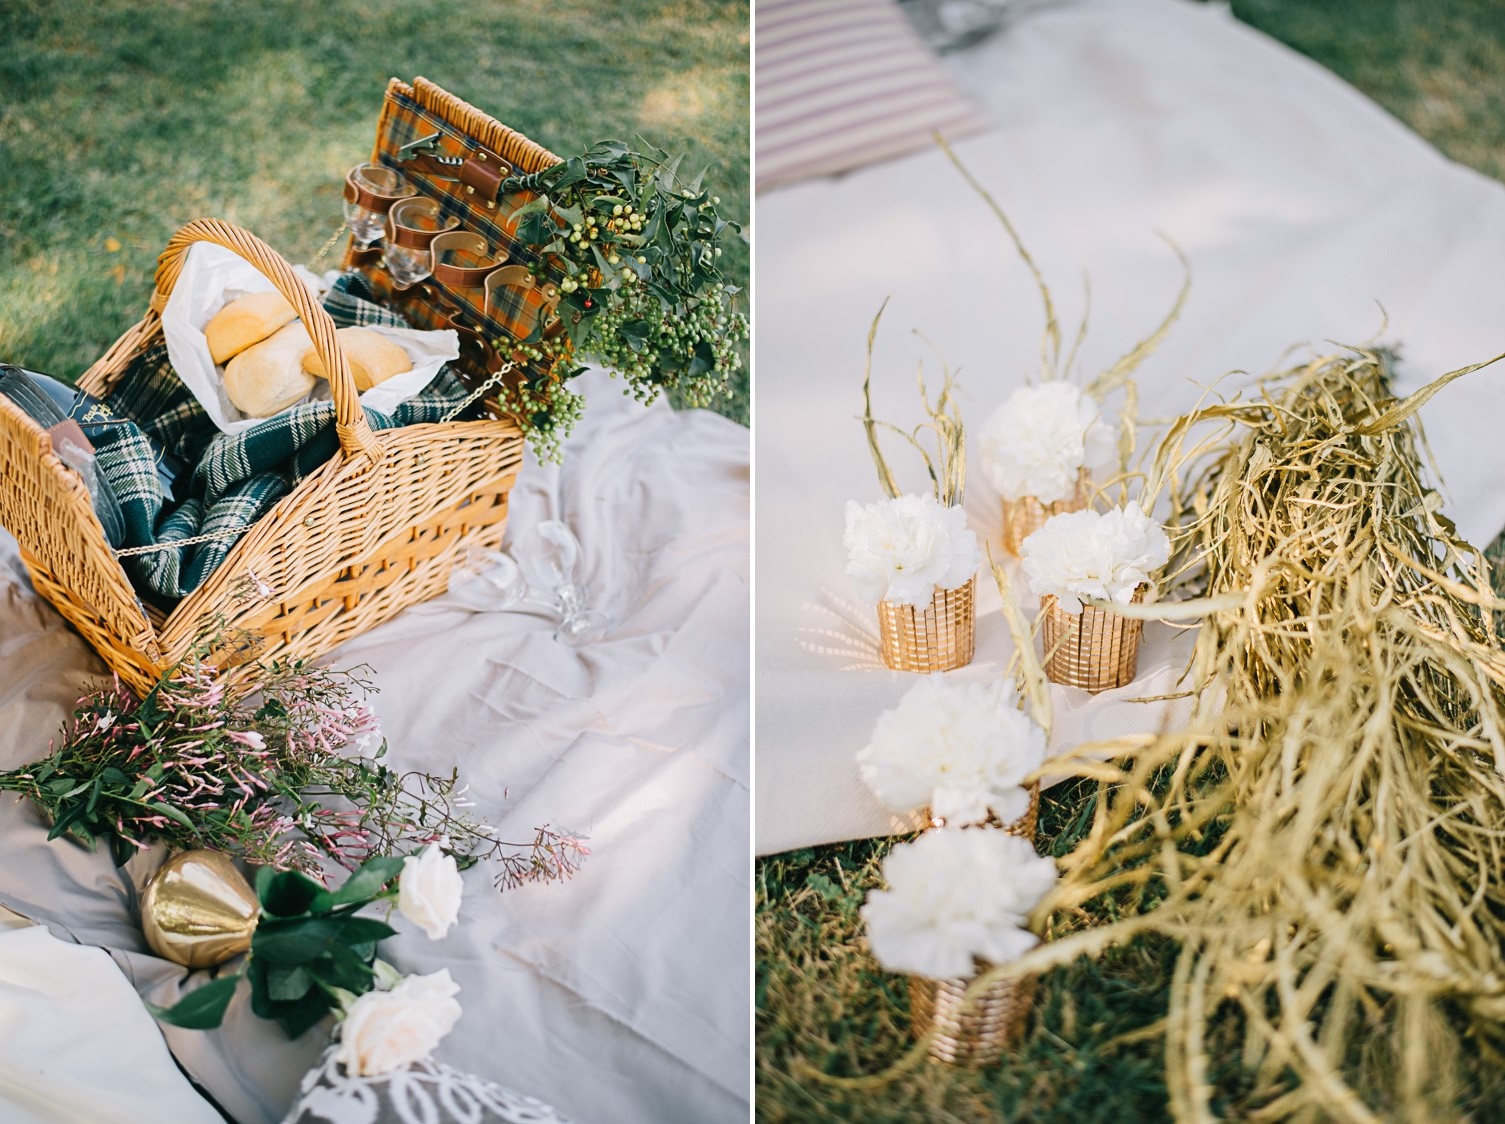 Delightful Vintage Wedding Ideas Inspired by Downton Abbey